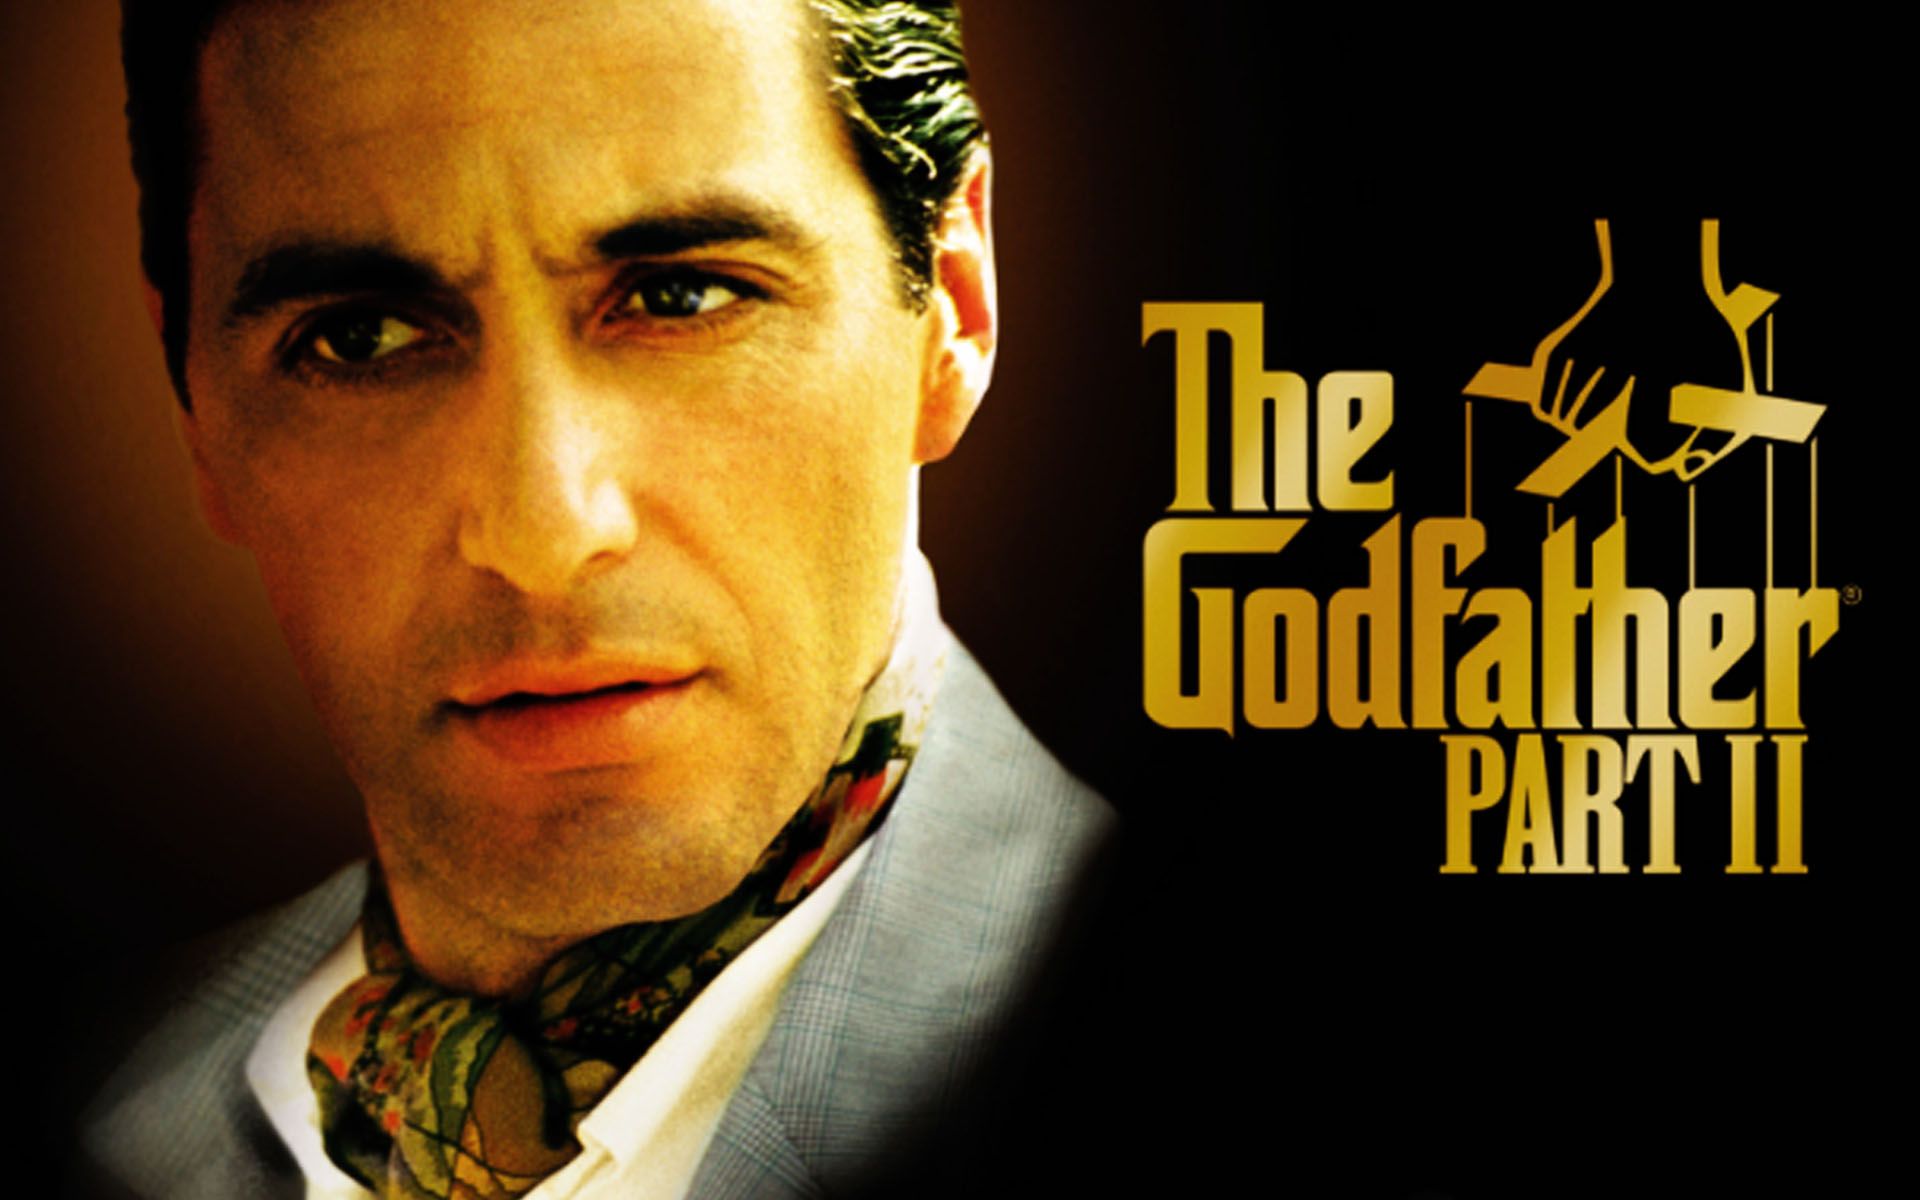 The Godfather 2 Poster Wallpapers